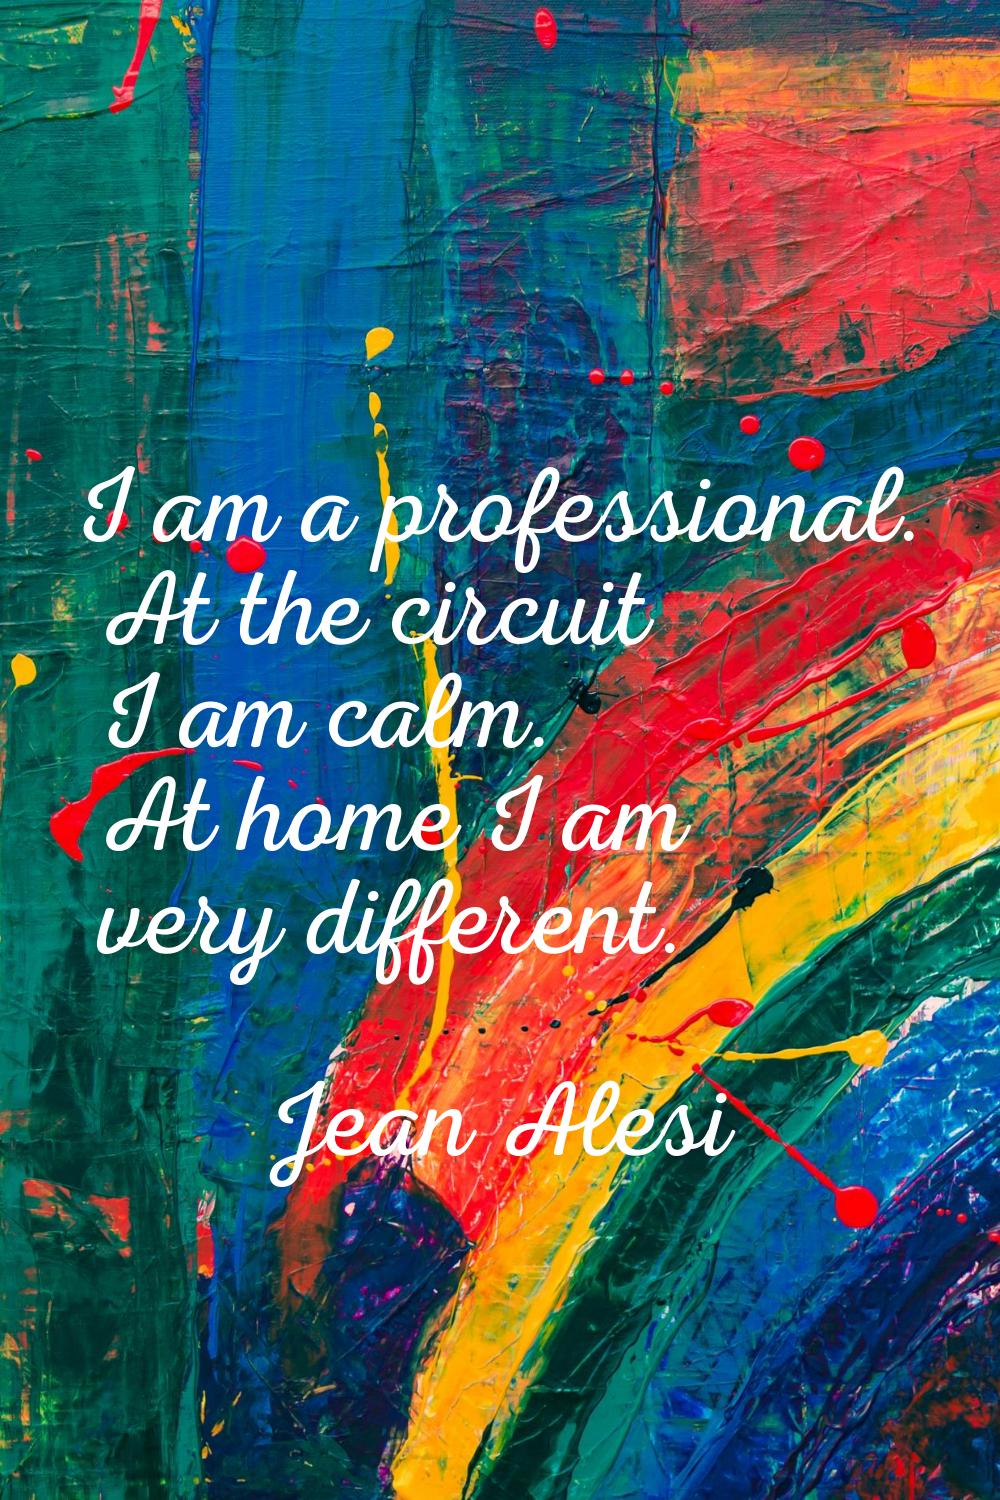 I am a professional. At the circuit I am calm. At home I am very different.